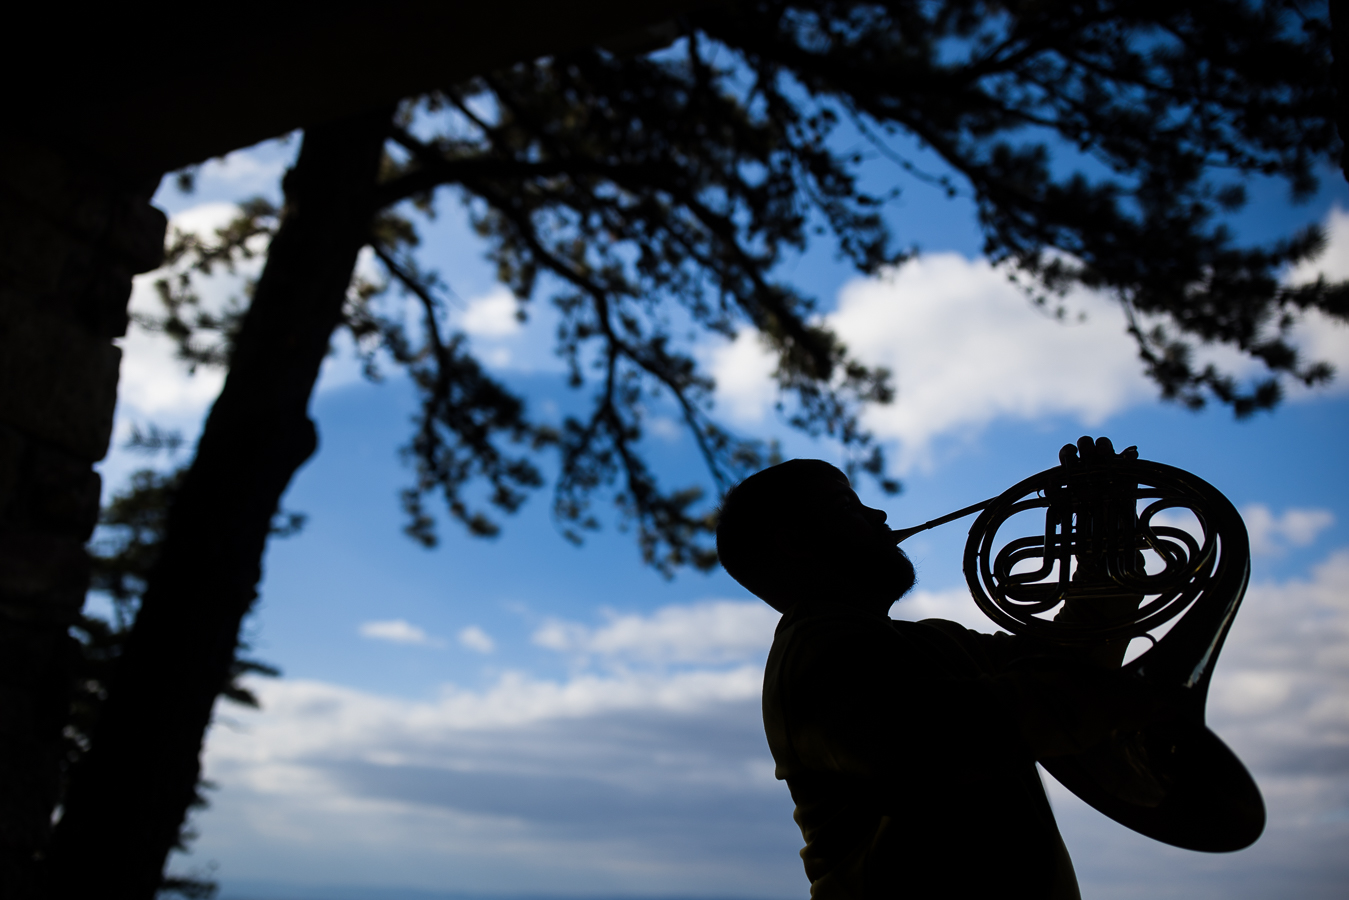 Northern York Senior Portrait Photographer, rhinehart photography, captures this unique silhouette of this french horn player as he stands on the kings gap overlook while playing his instrument 